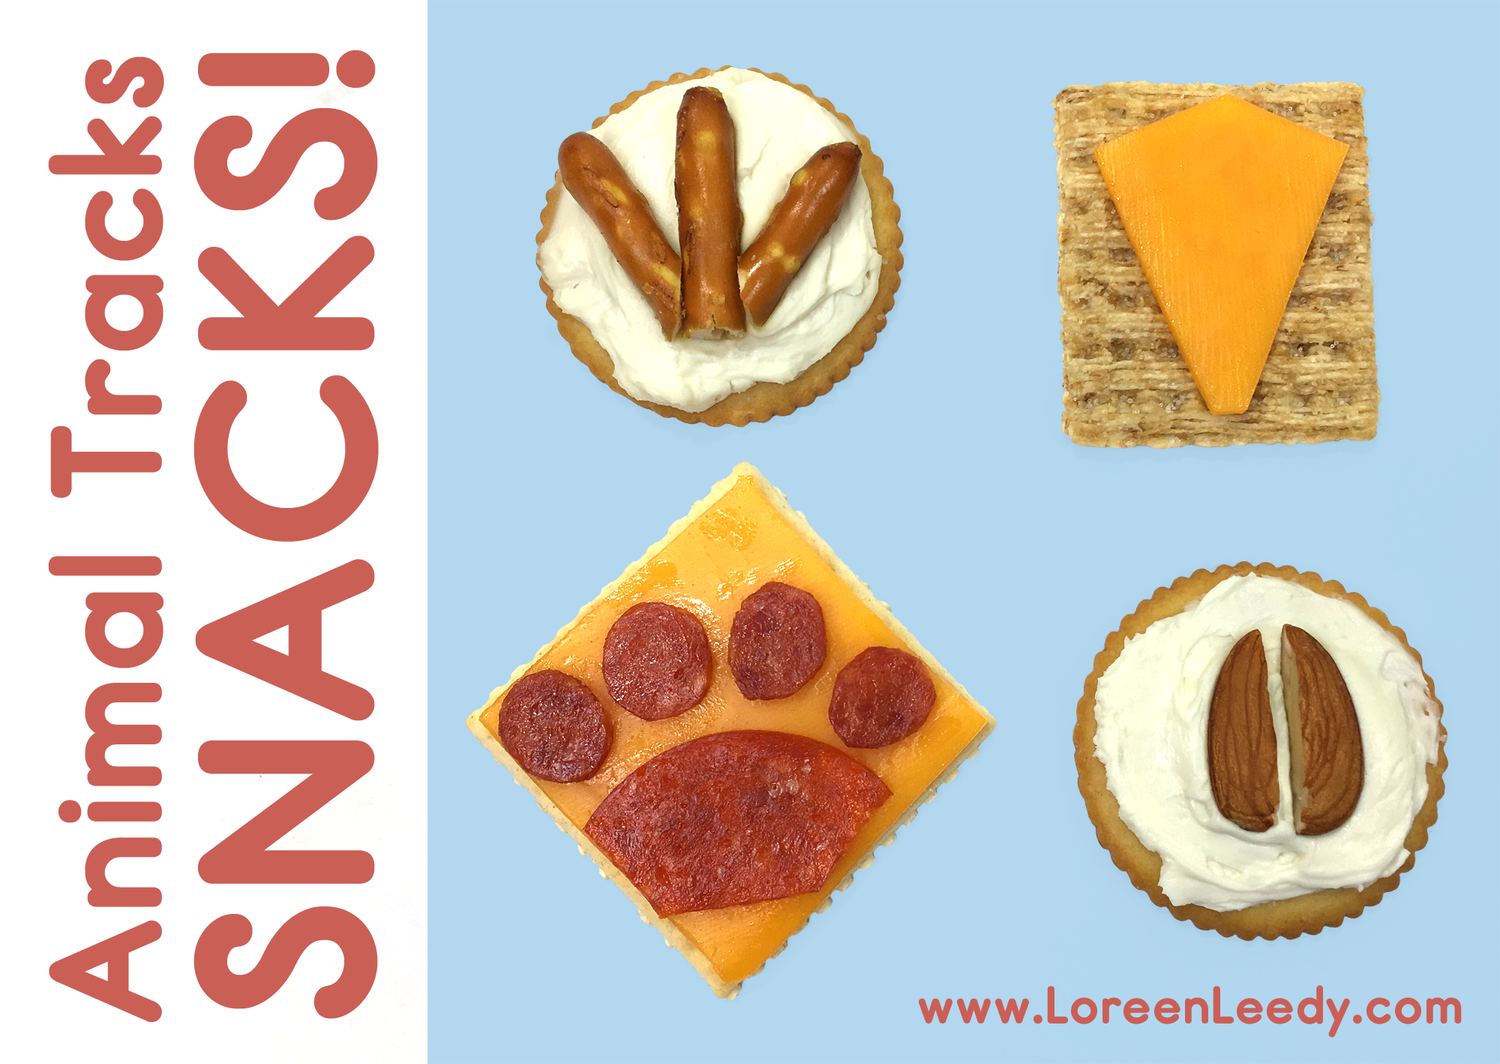 Just a few of the yummy snacks you can make to tie in with animal tracks, baby animals, nature, wildlife, and similar themes.